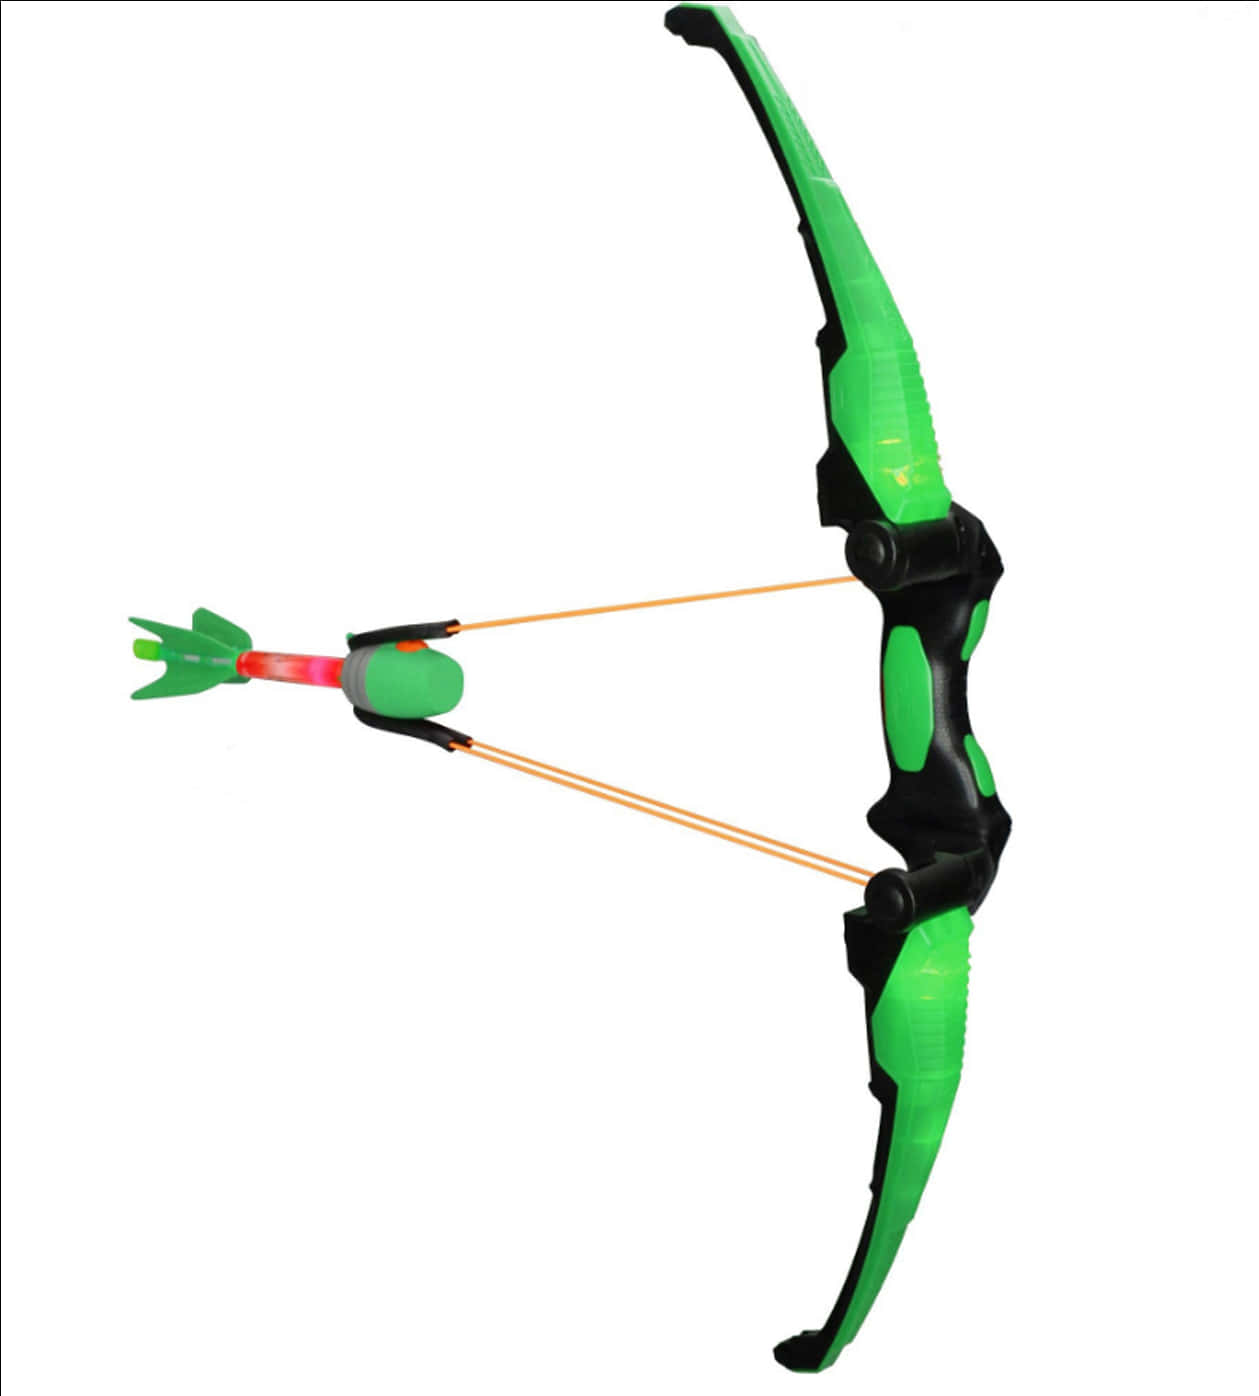 A Green And Black Toy Bow And Arrow